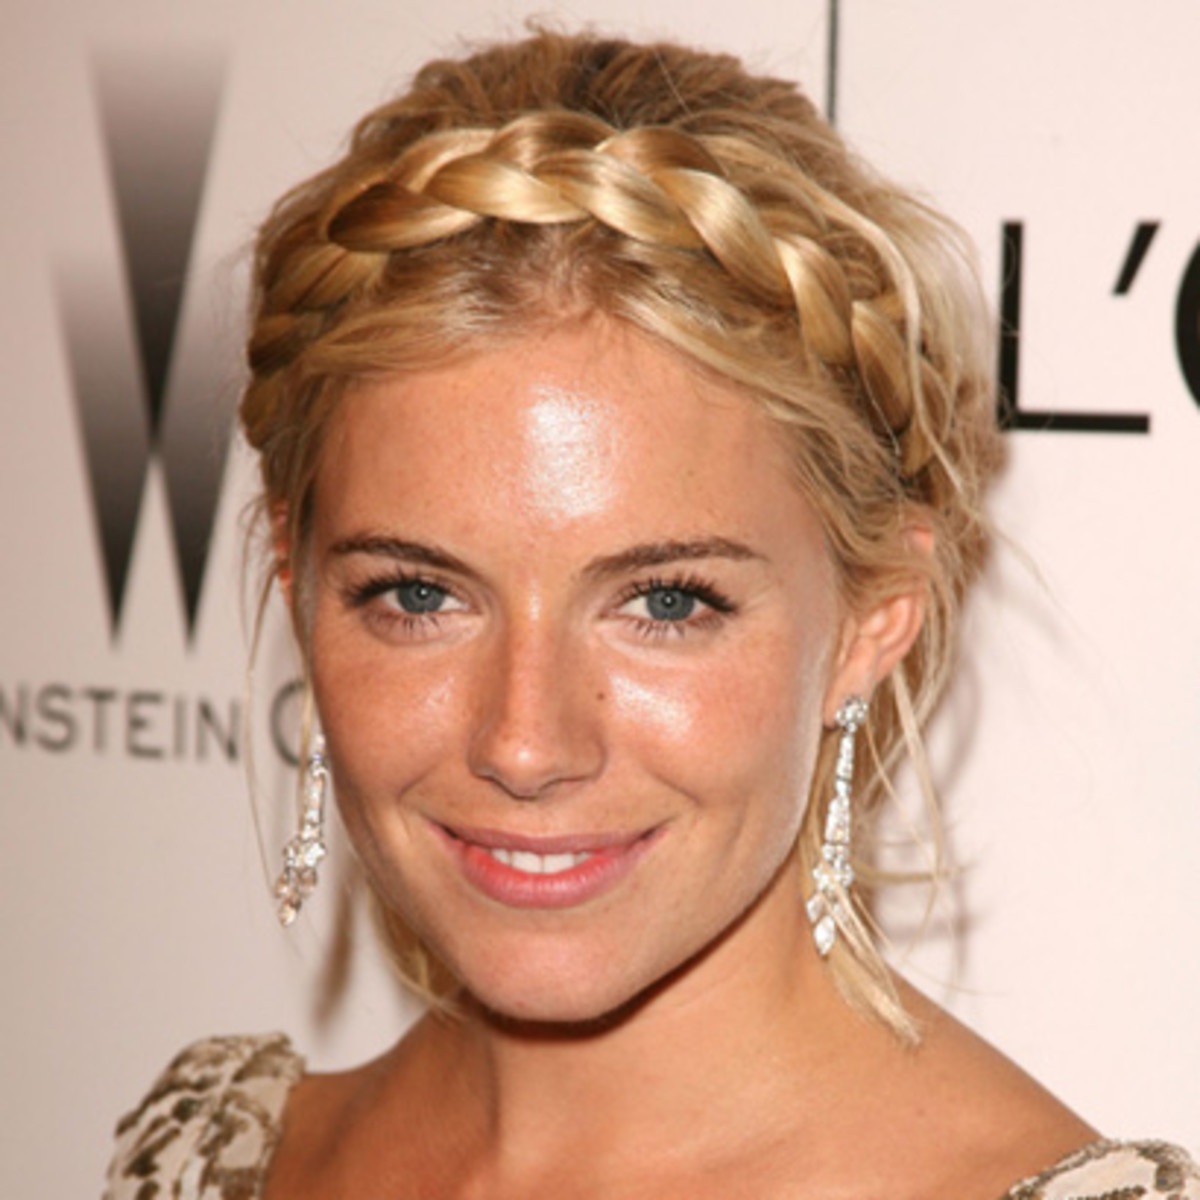 Best Braids Hairstyle for Your Face Shape (Women's Edition) - HubPages